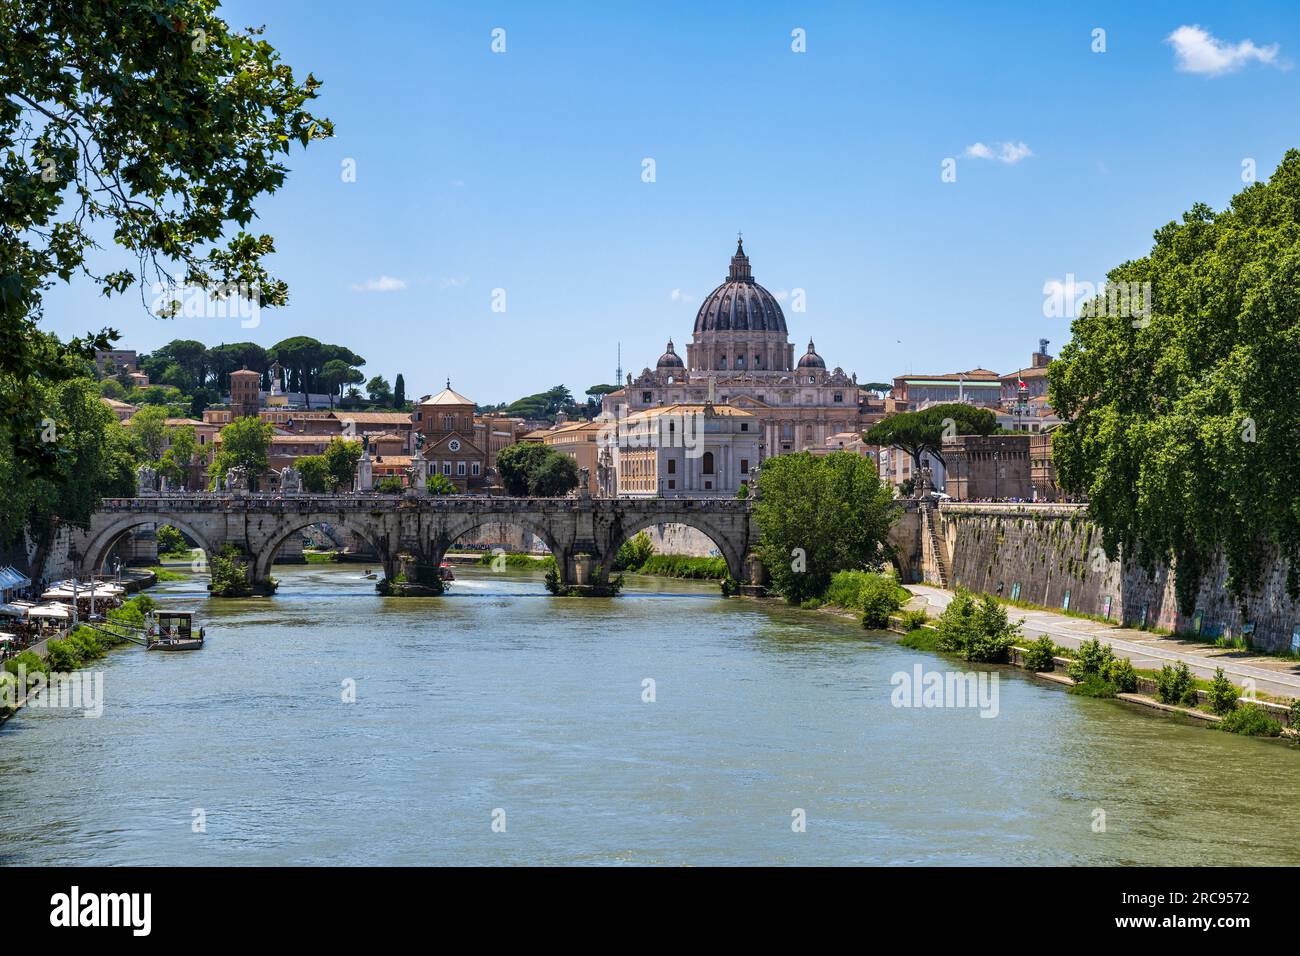 View along River Tiber to Ponte Sant' Angelo, with dome of St. Peter's Basilica in background, in Rome, Lazio Region, Italy Stock Photo